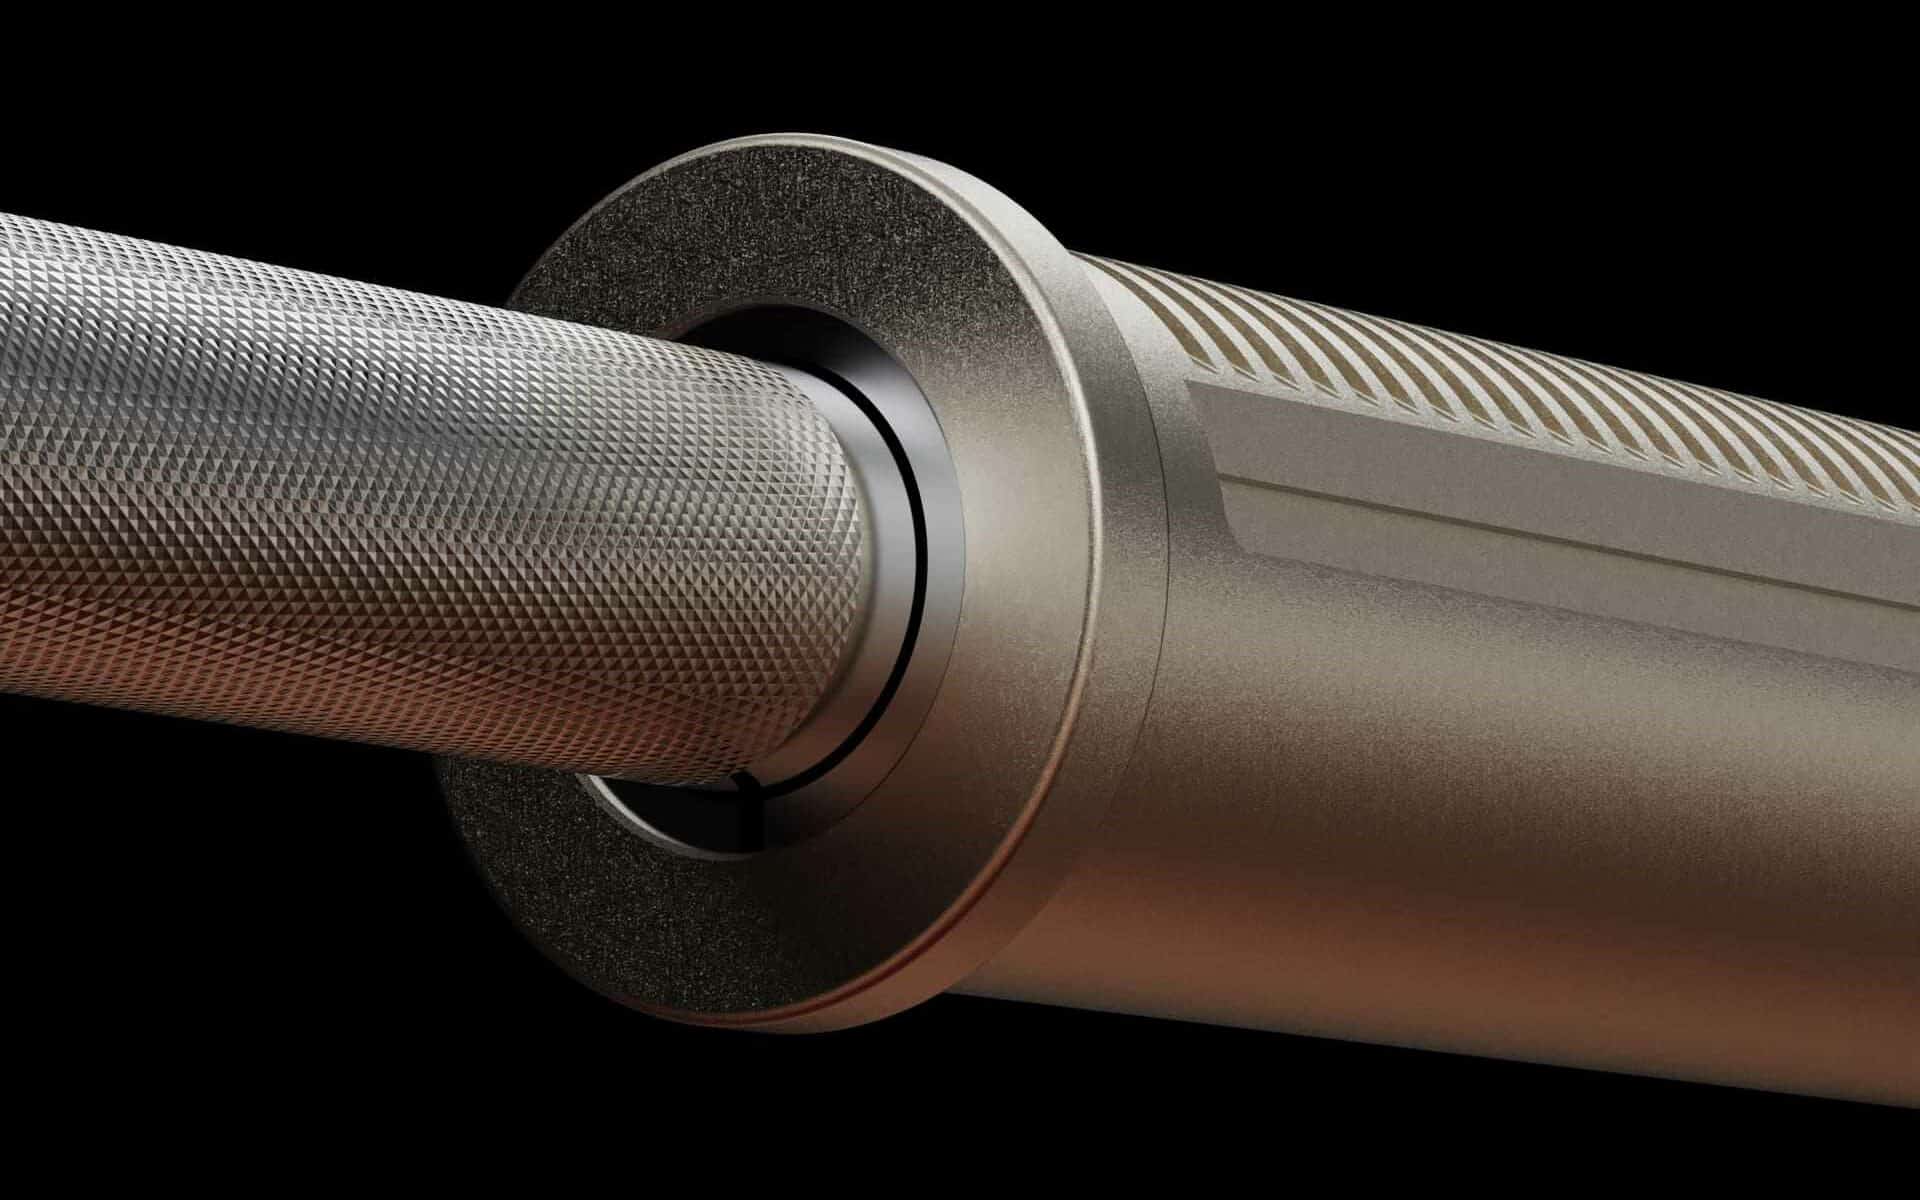 dumbler close up of stainless steel knurling